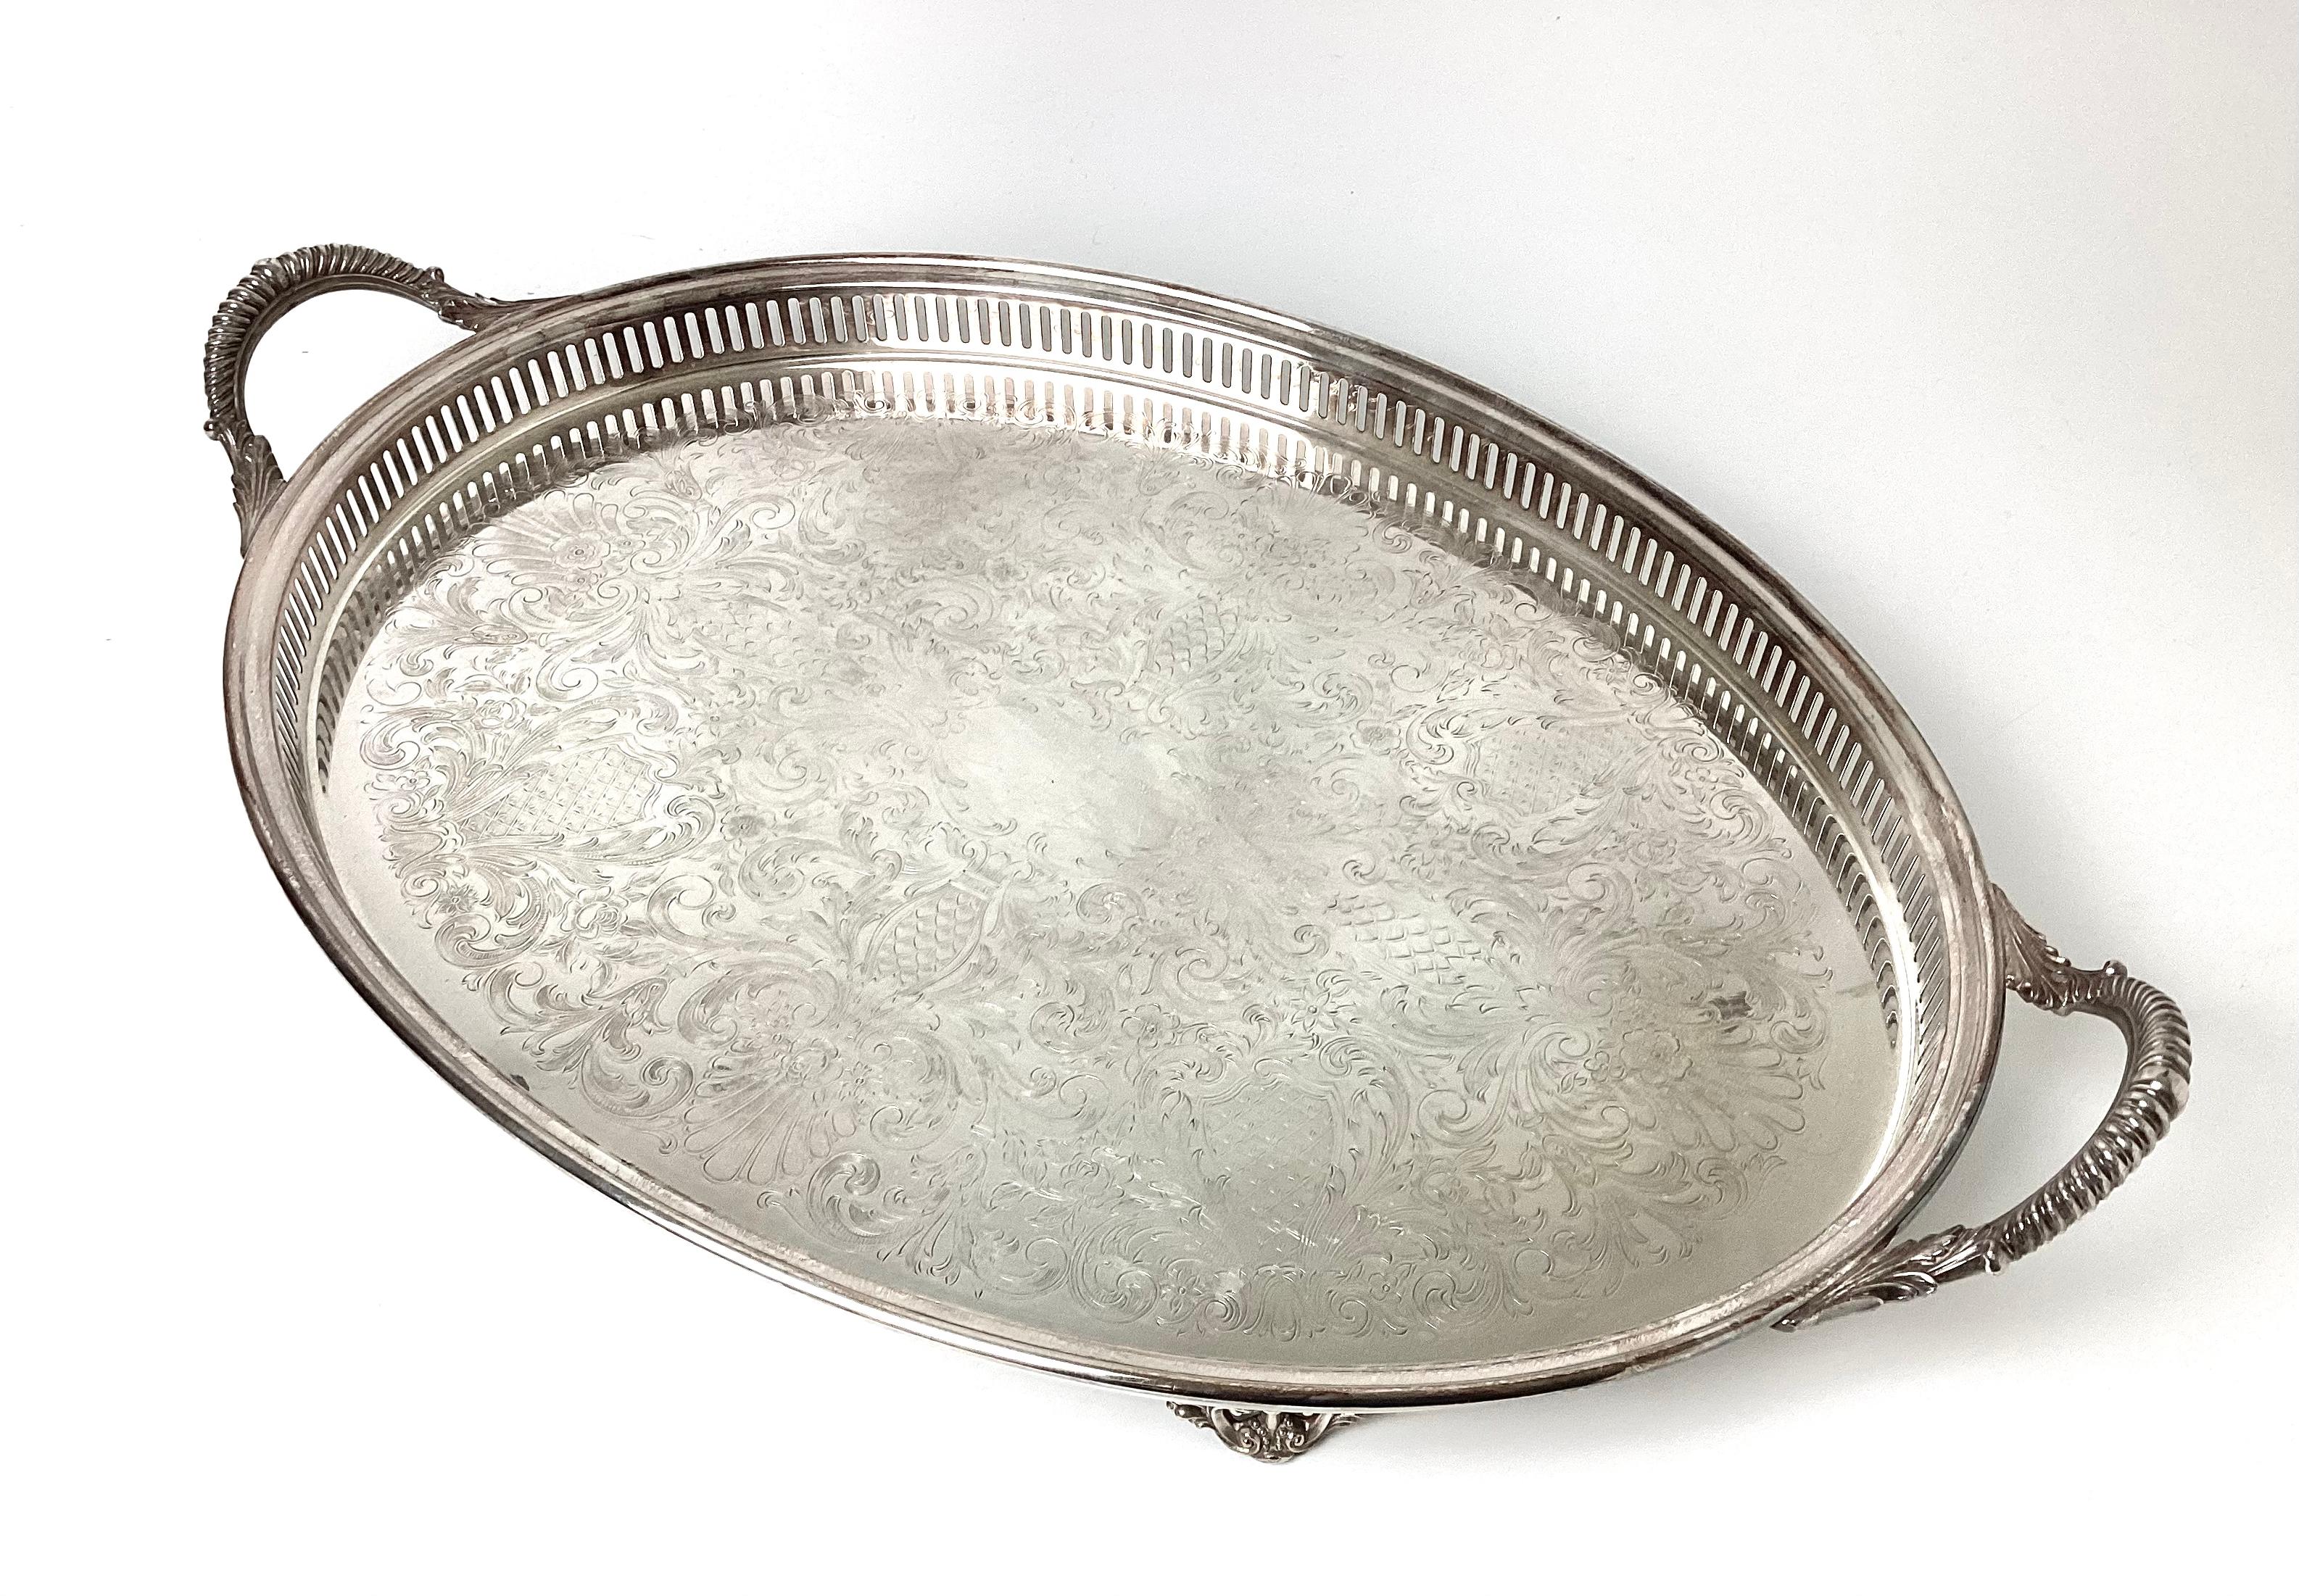 American Large Antique Oval Silver Plated Gallery Serving Drinks Tray by W&S Blackinton